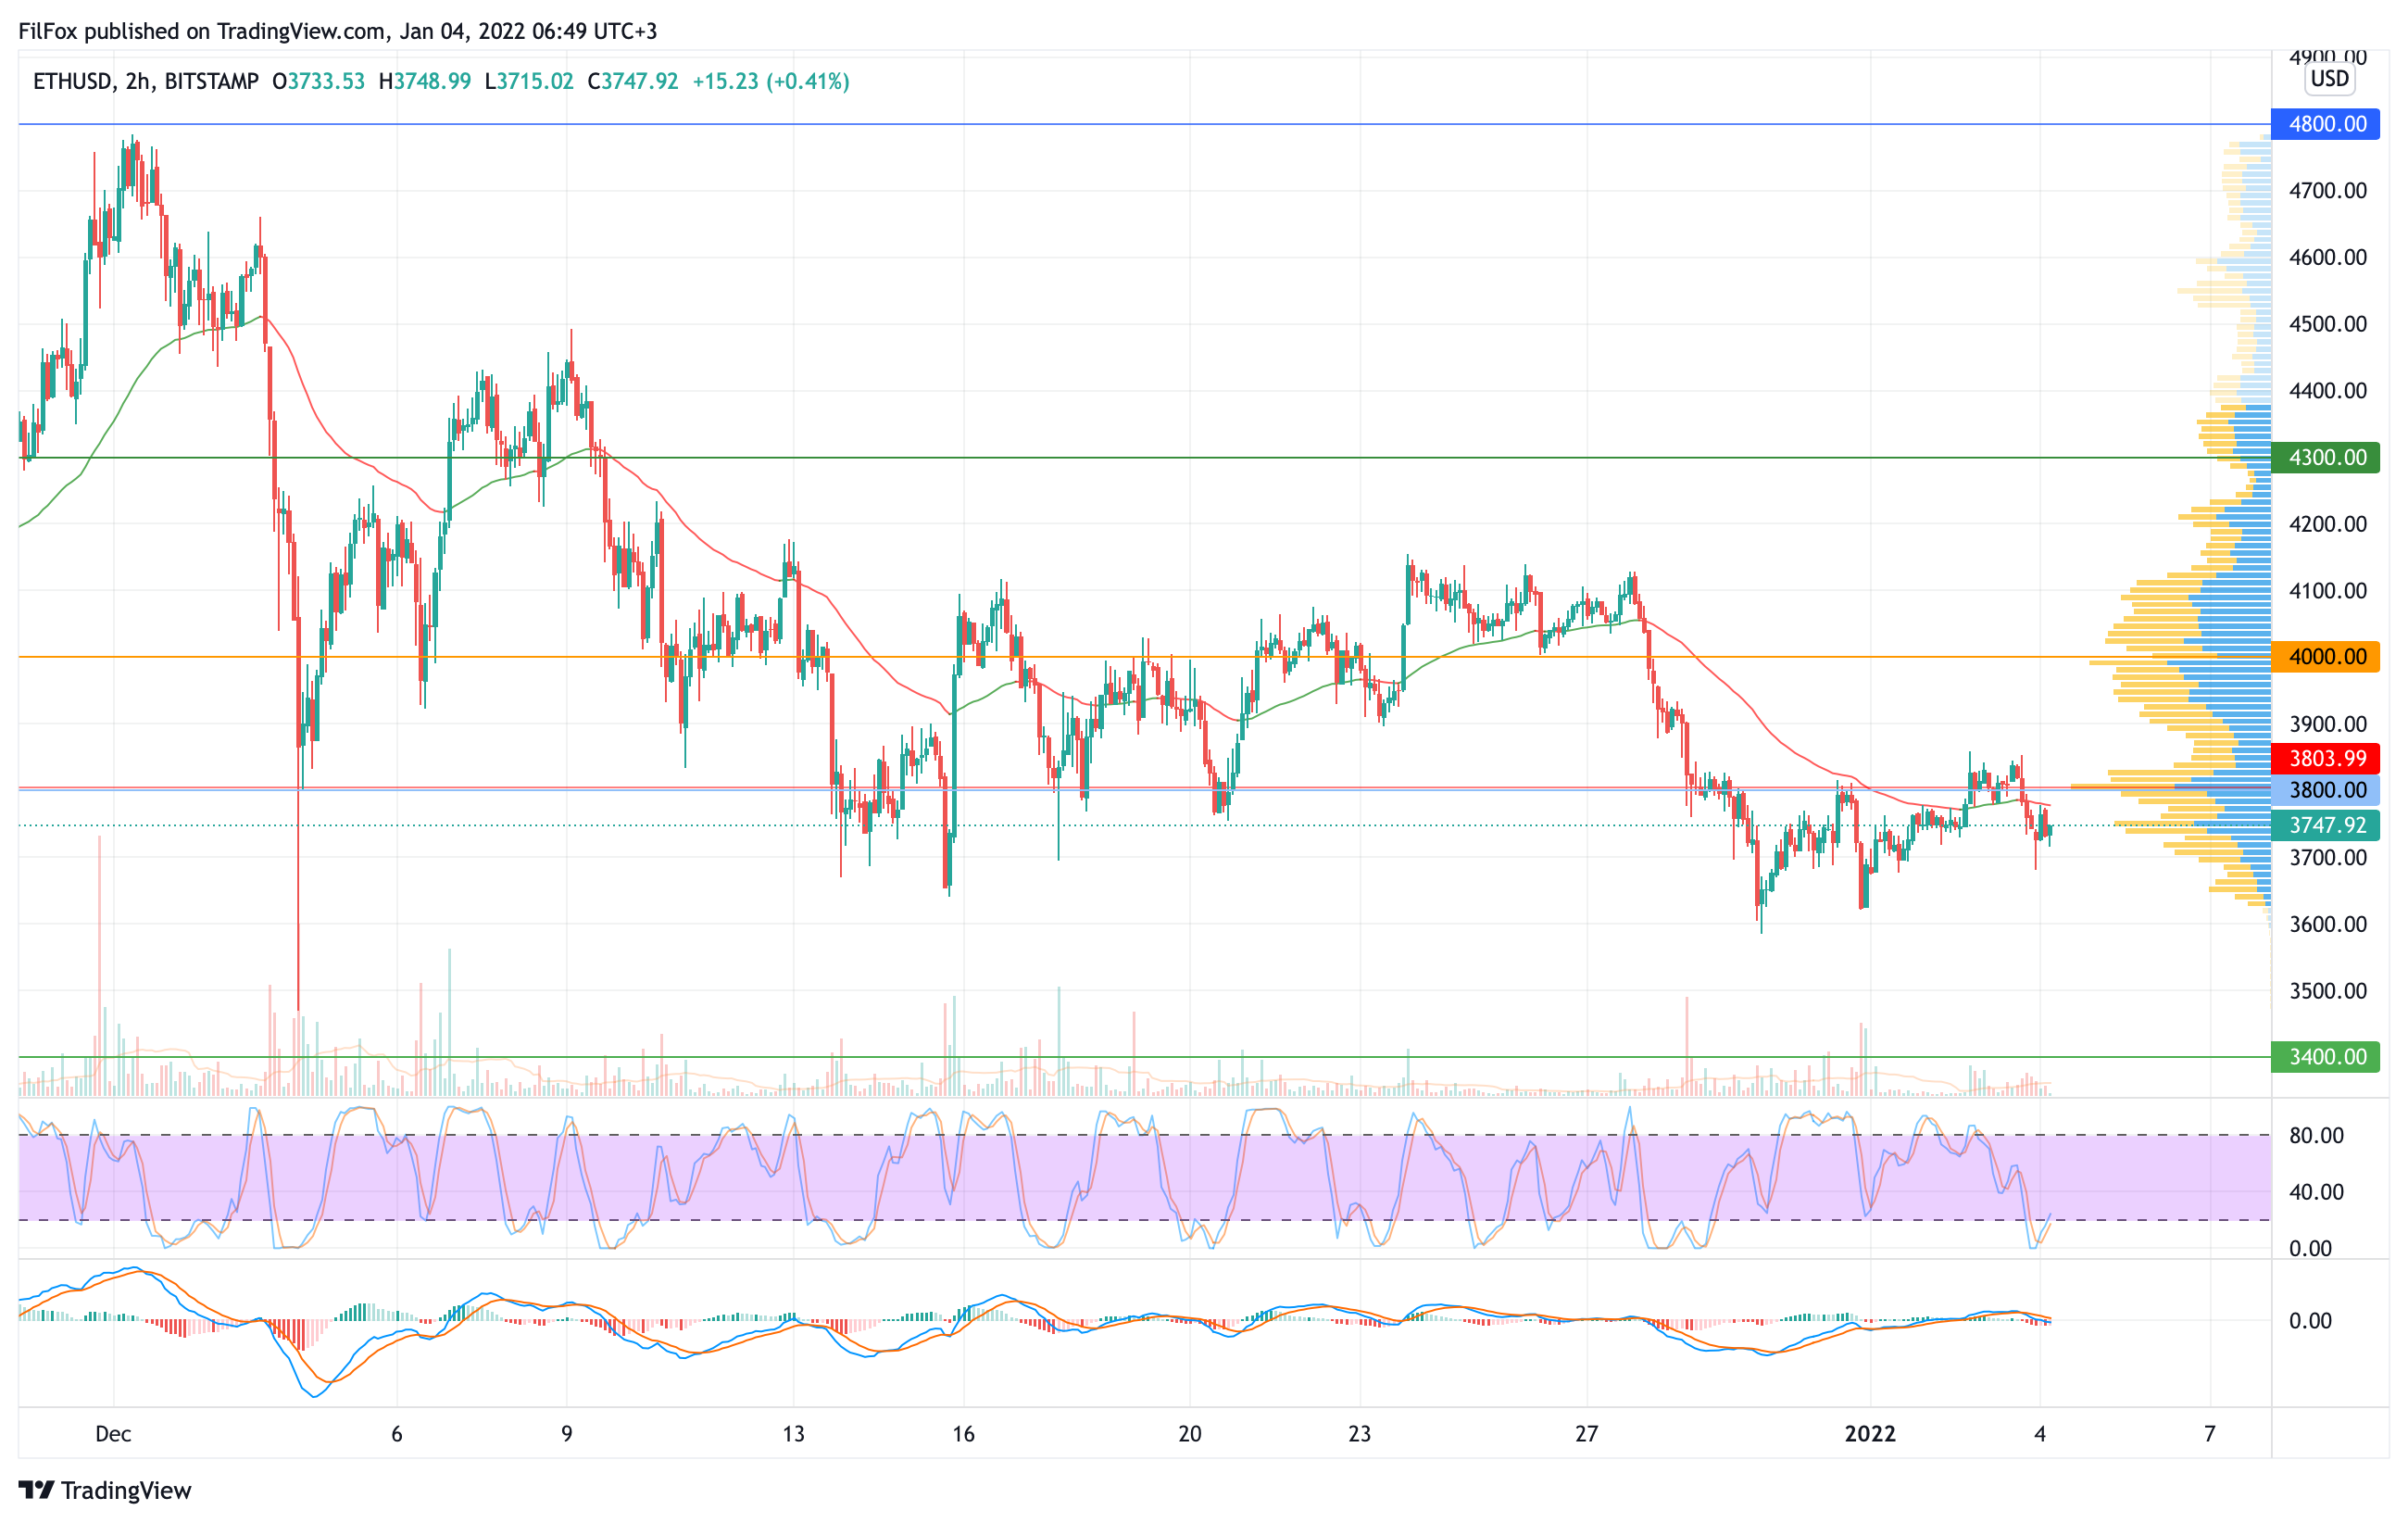 Analysis of the prices of Bitcoin, Ethereum, XRP for 01/04/2022